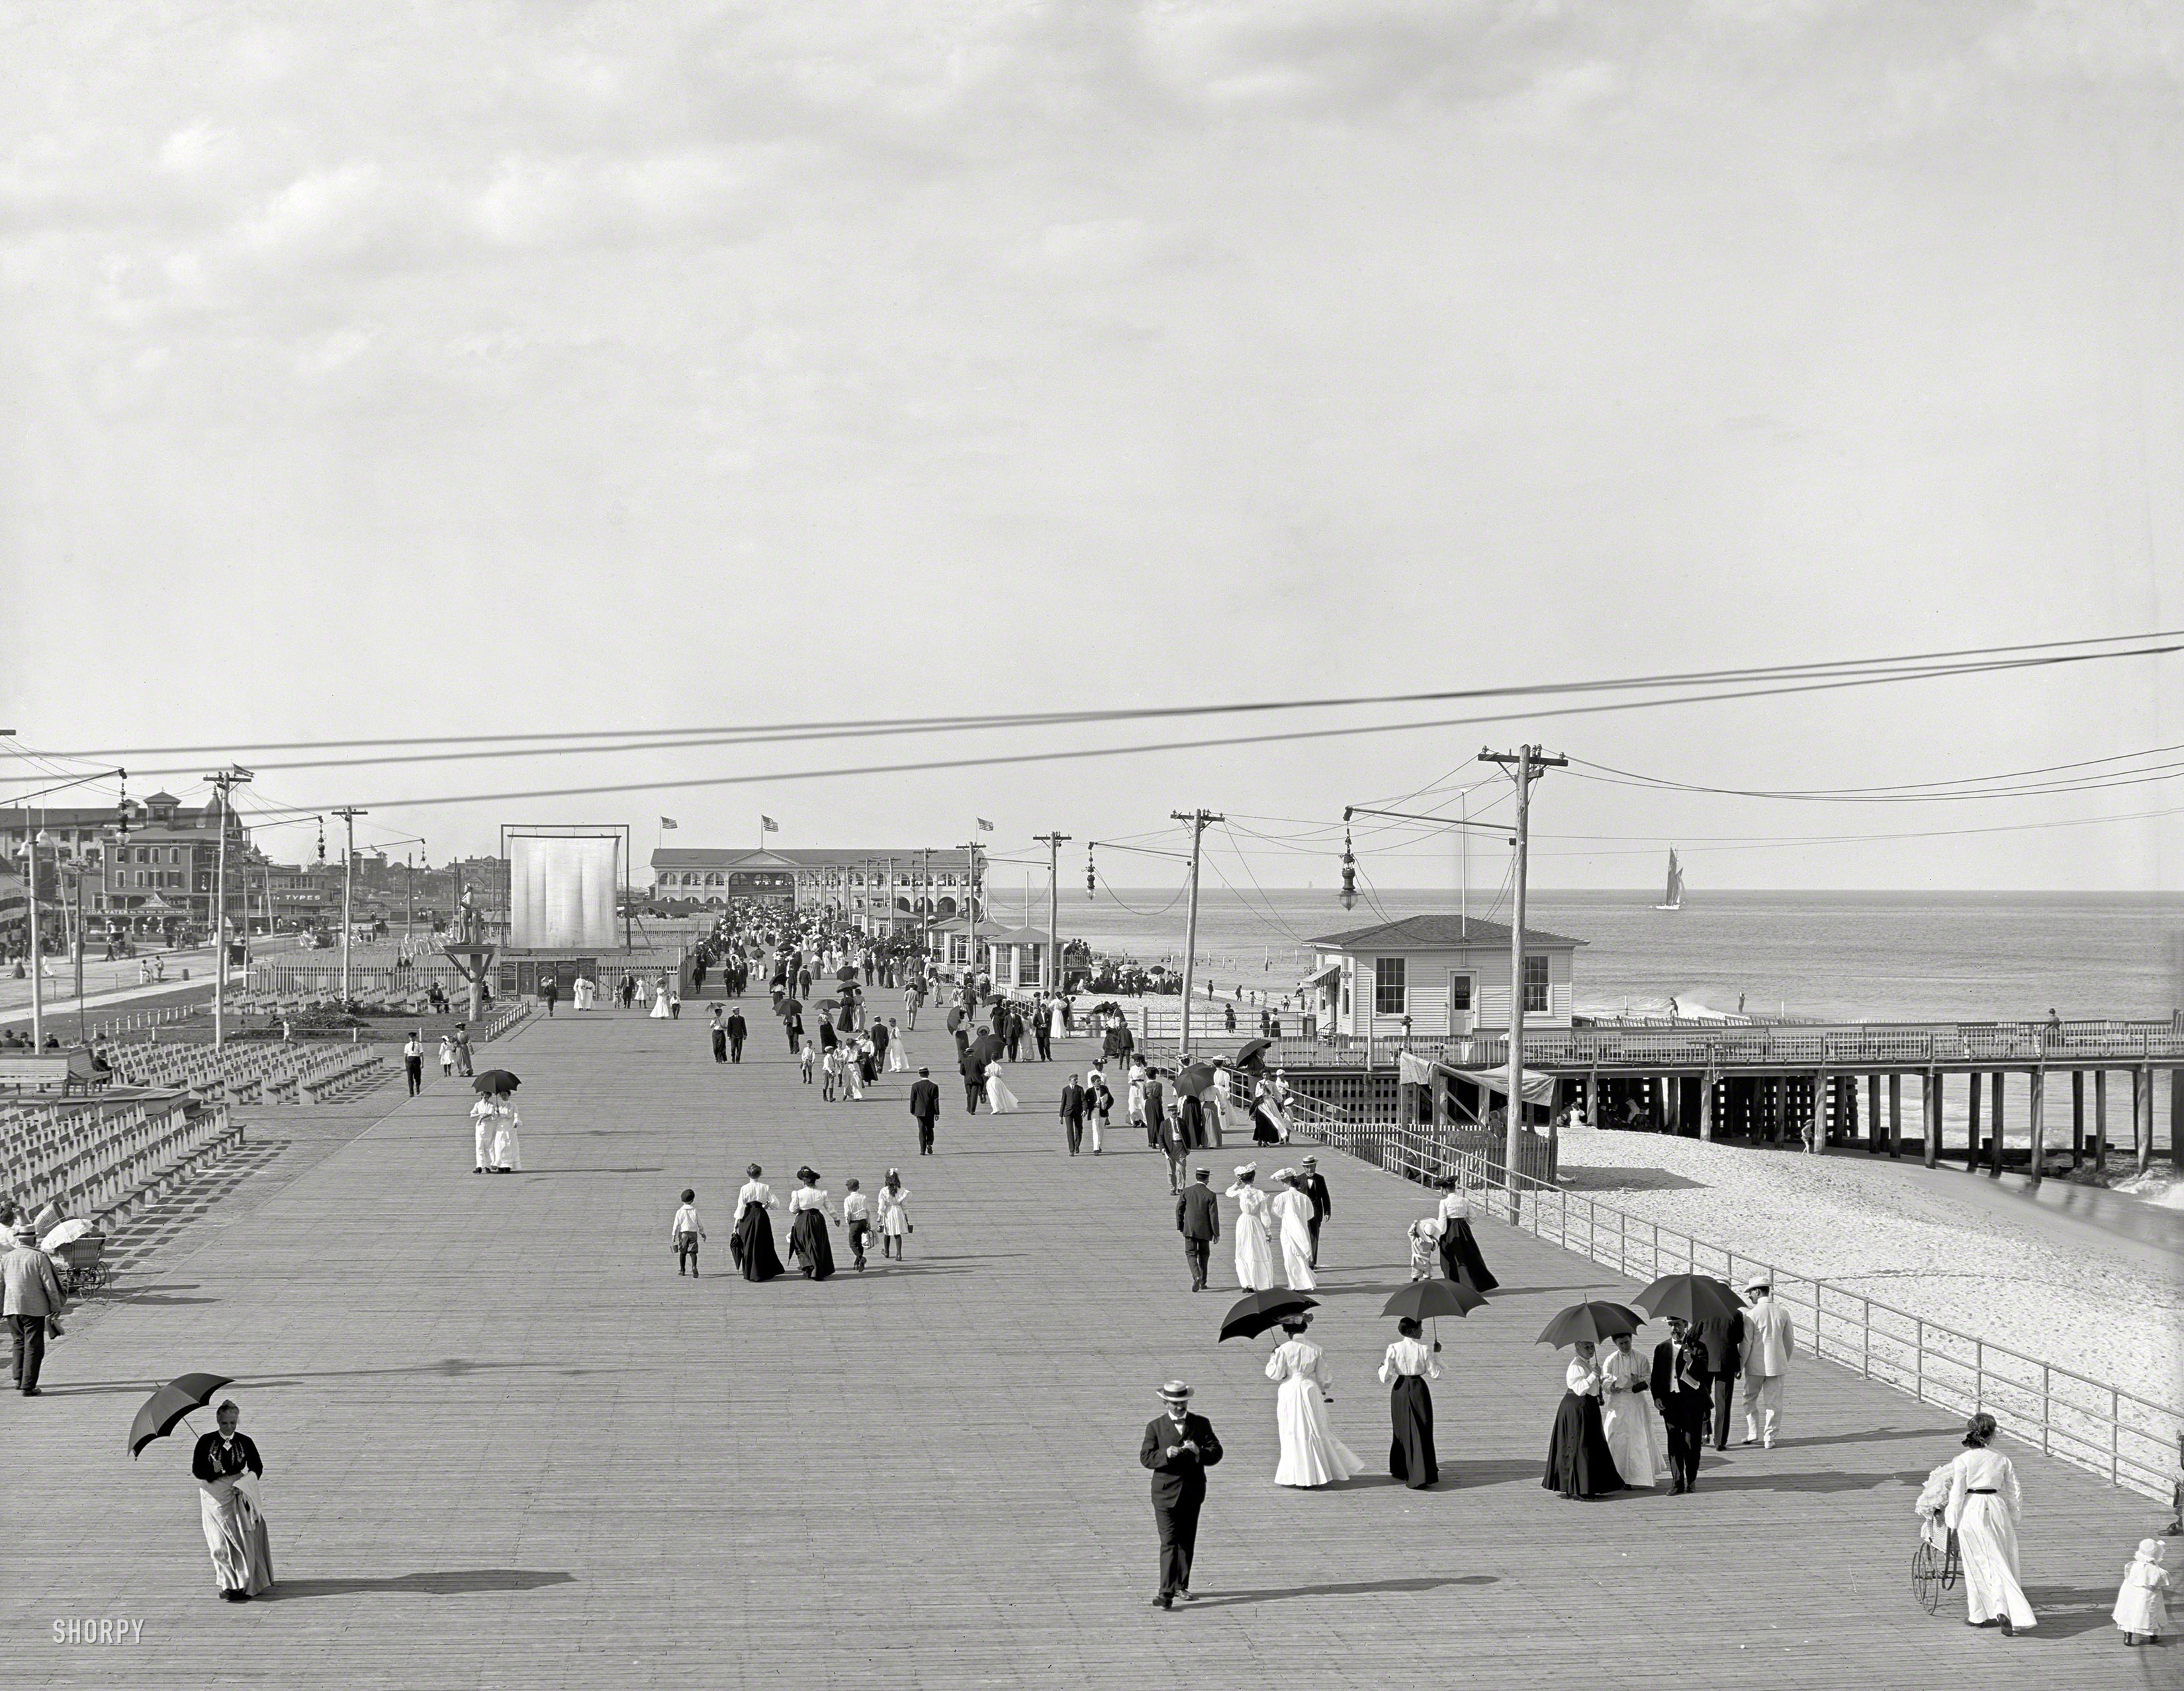 New Jersey circa 1905. "The Boardwalk, Asbury Park." 8x10 inch dry plate glass negative, Detroit Publishing Company. View full size.